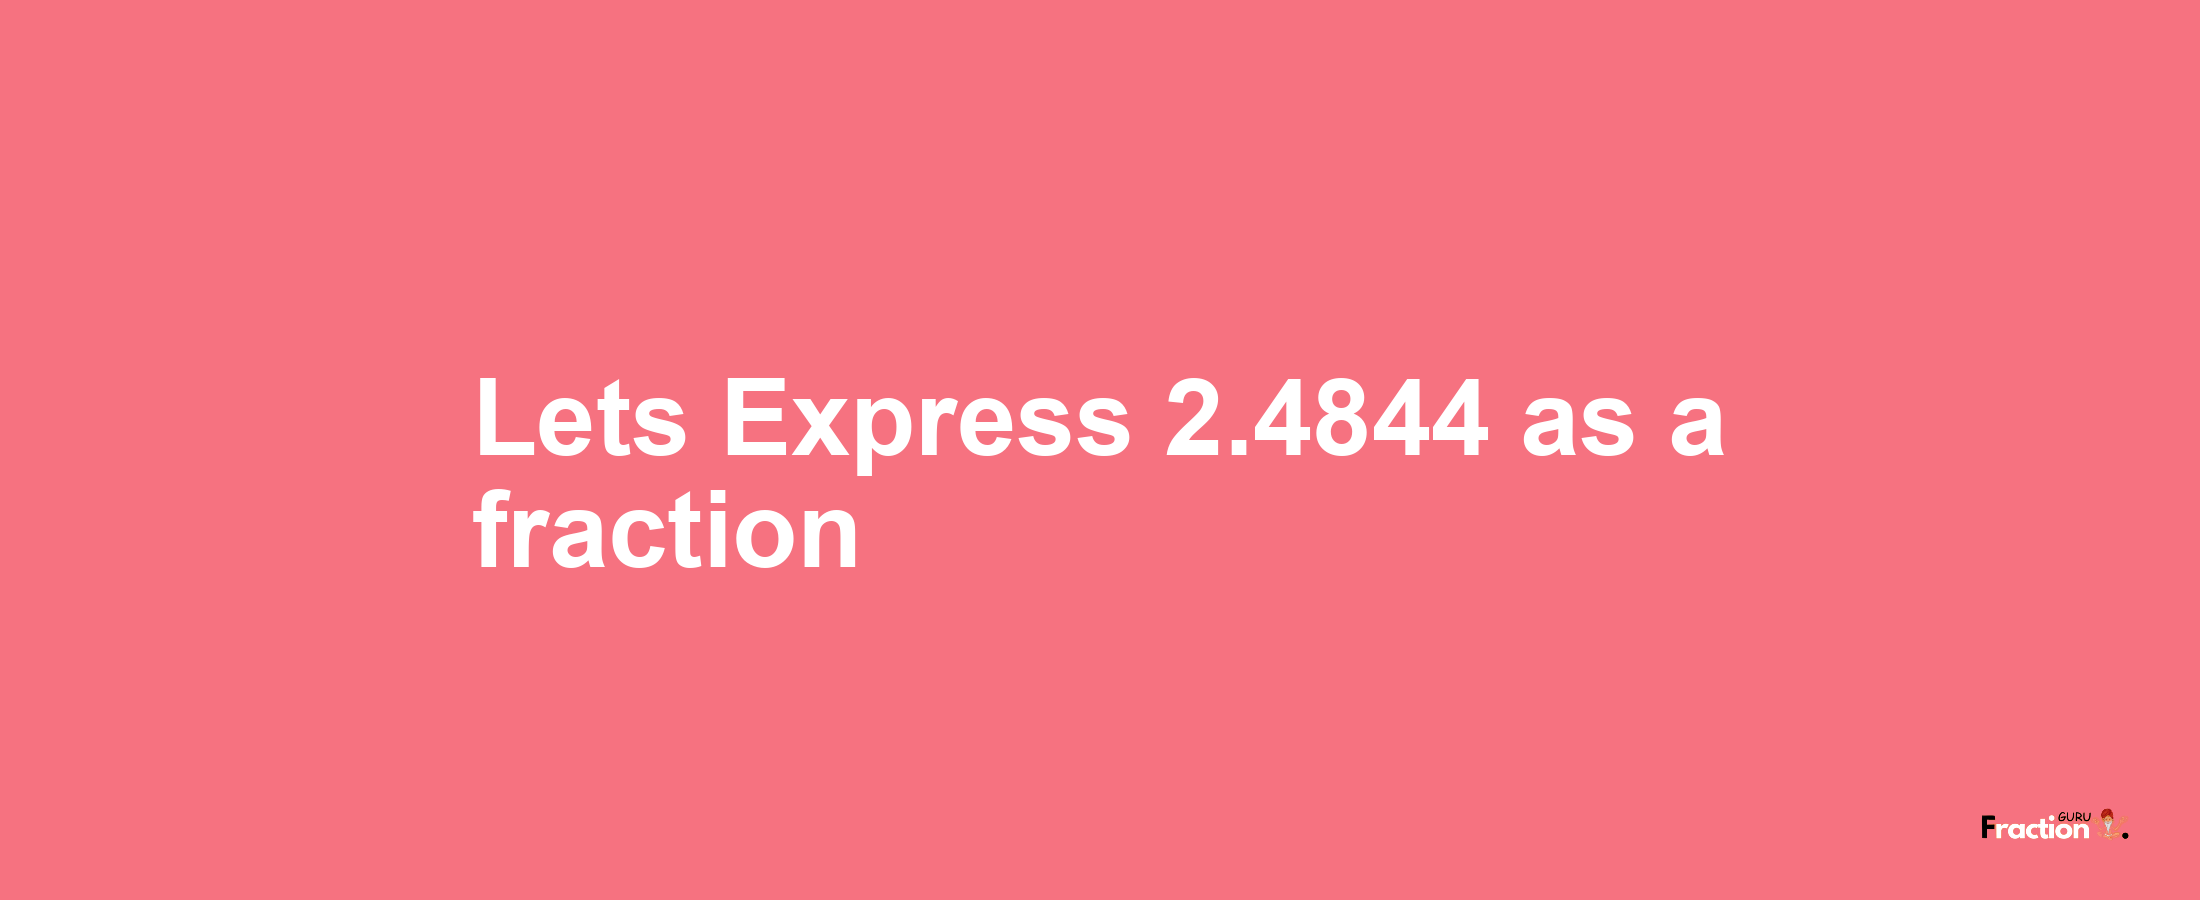 Lets Express 2.4844 as afraction